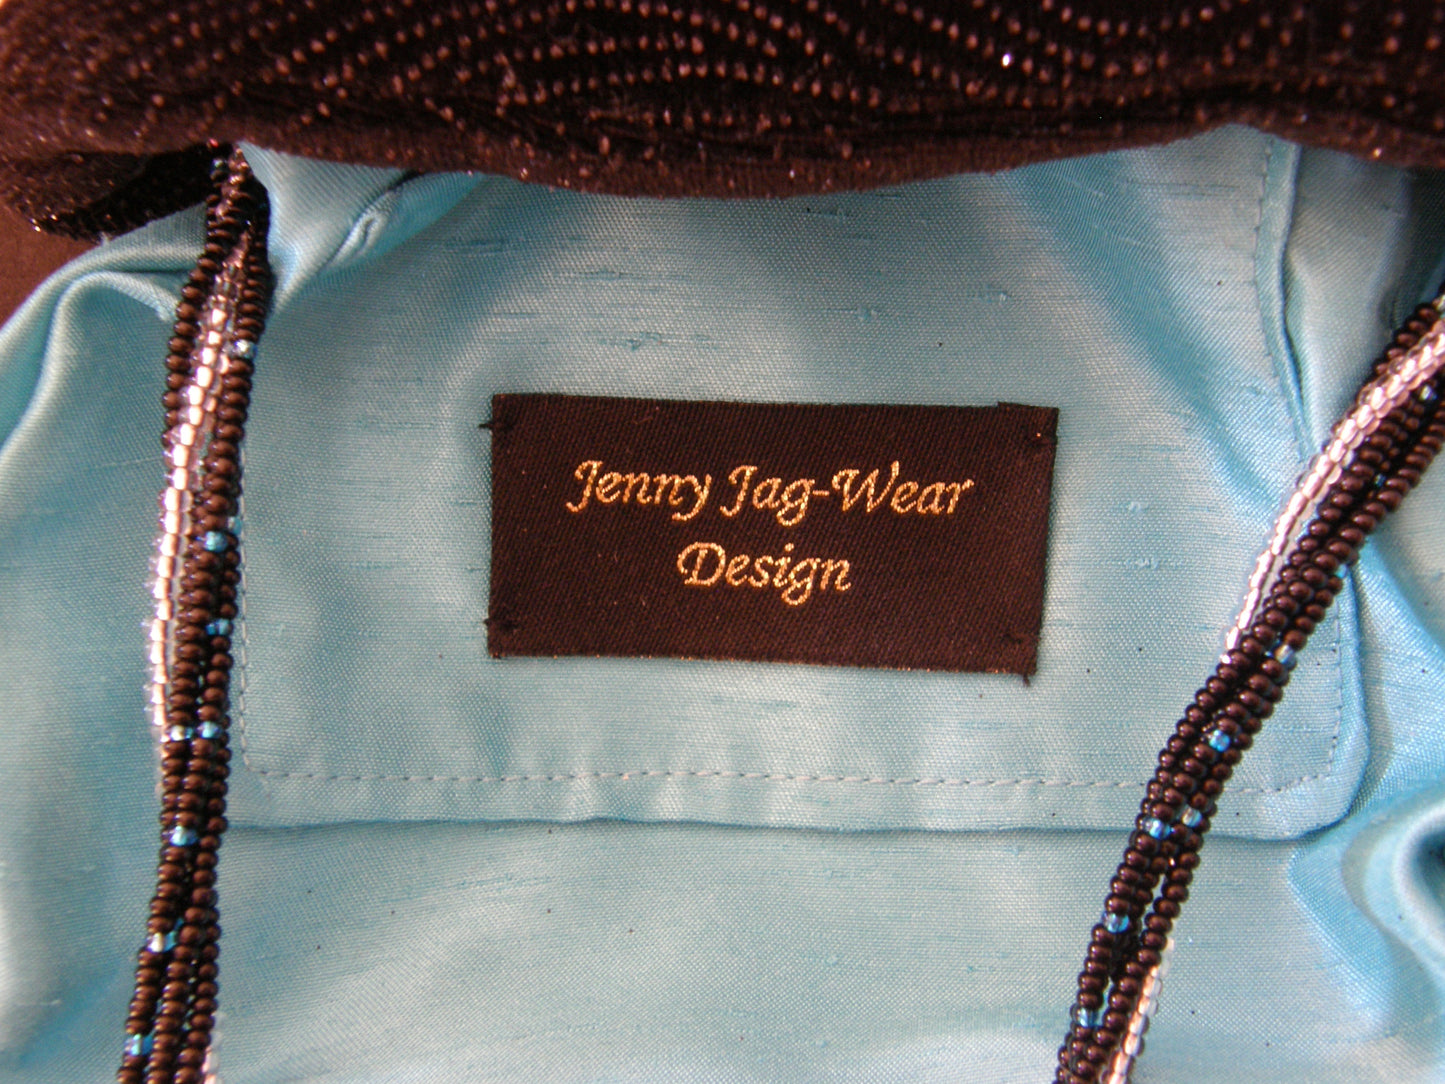 Black and Silver Evening Bag from Jenny Jag-Wear Design.  Photo depicts the inside lining to this evening bag in peacock  satin. The Merle Collection from Jenny Jag-Wear Design.